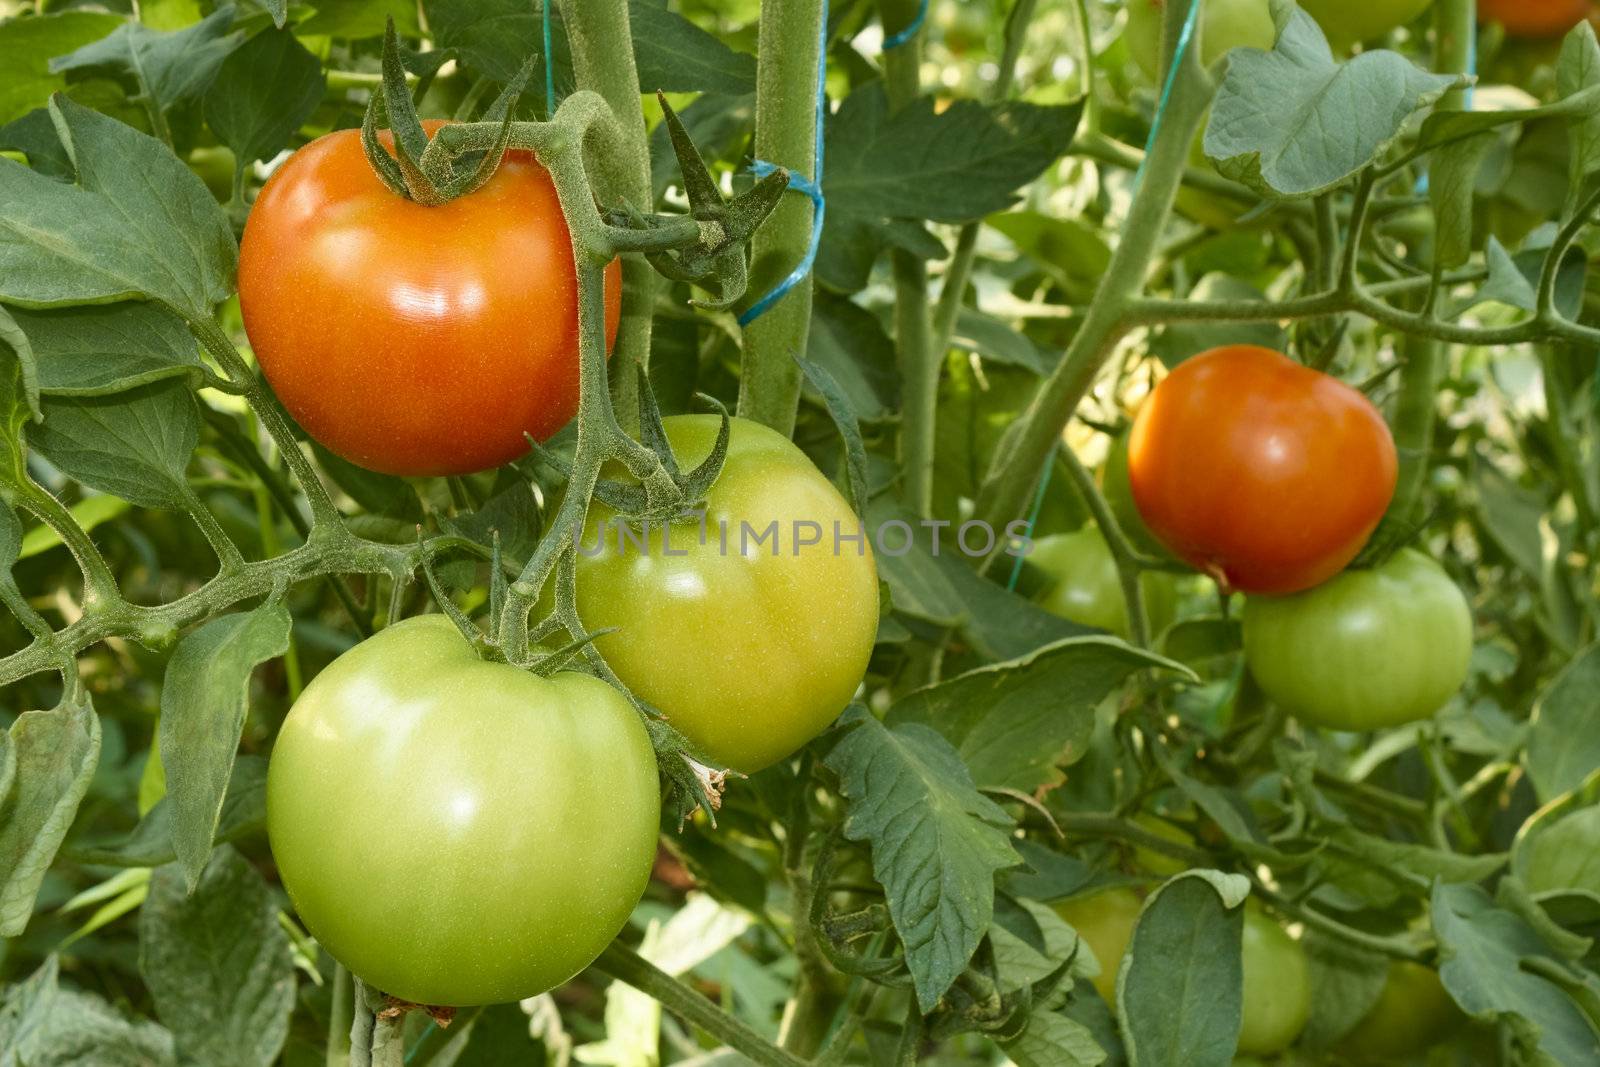 Bunch with red and unripe green tomatoes growing in greenhouse